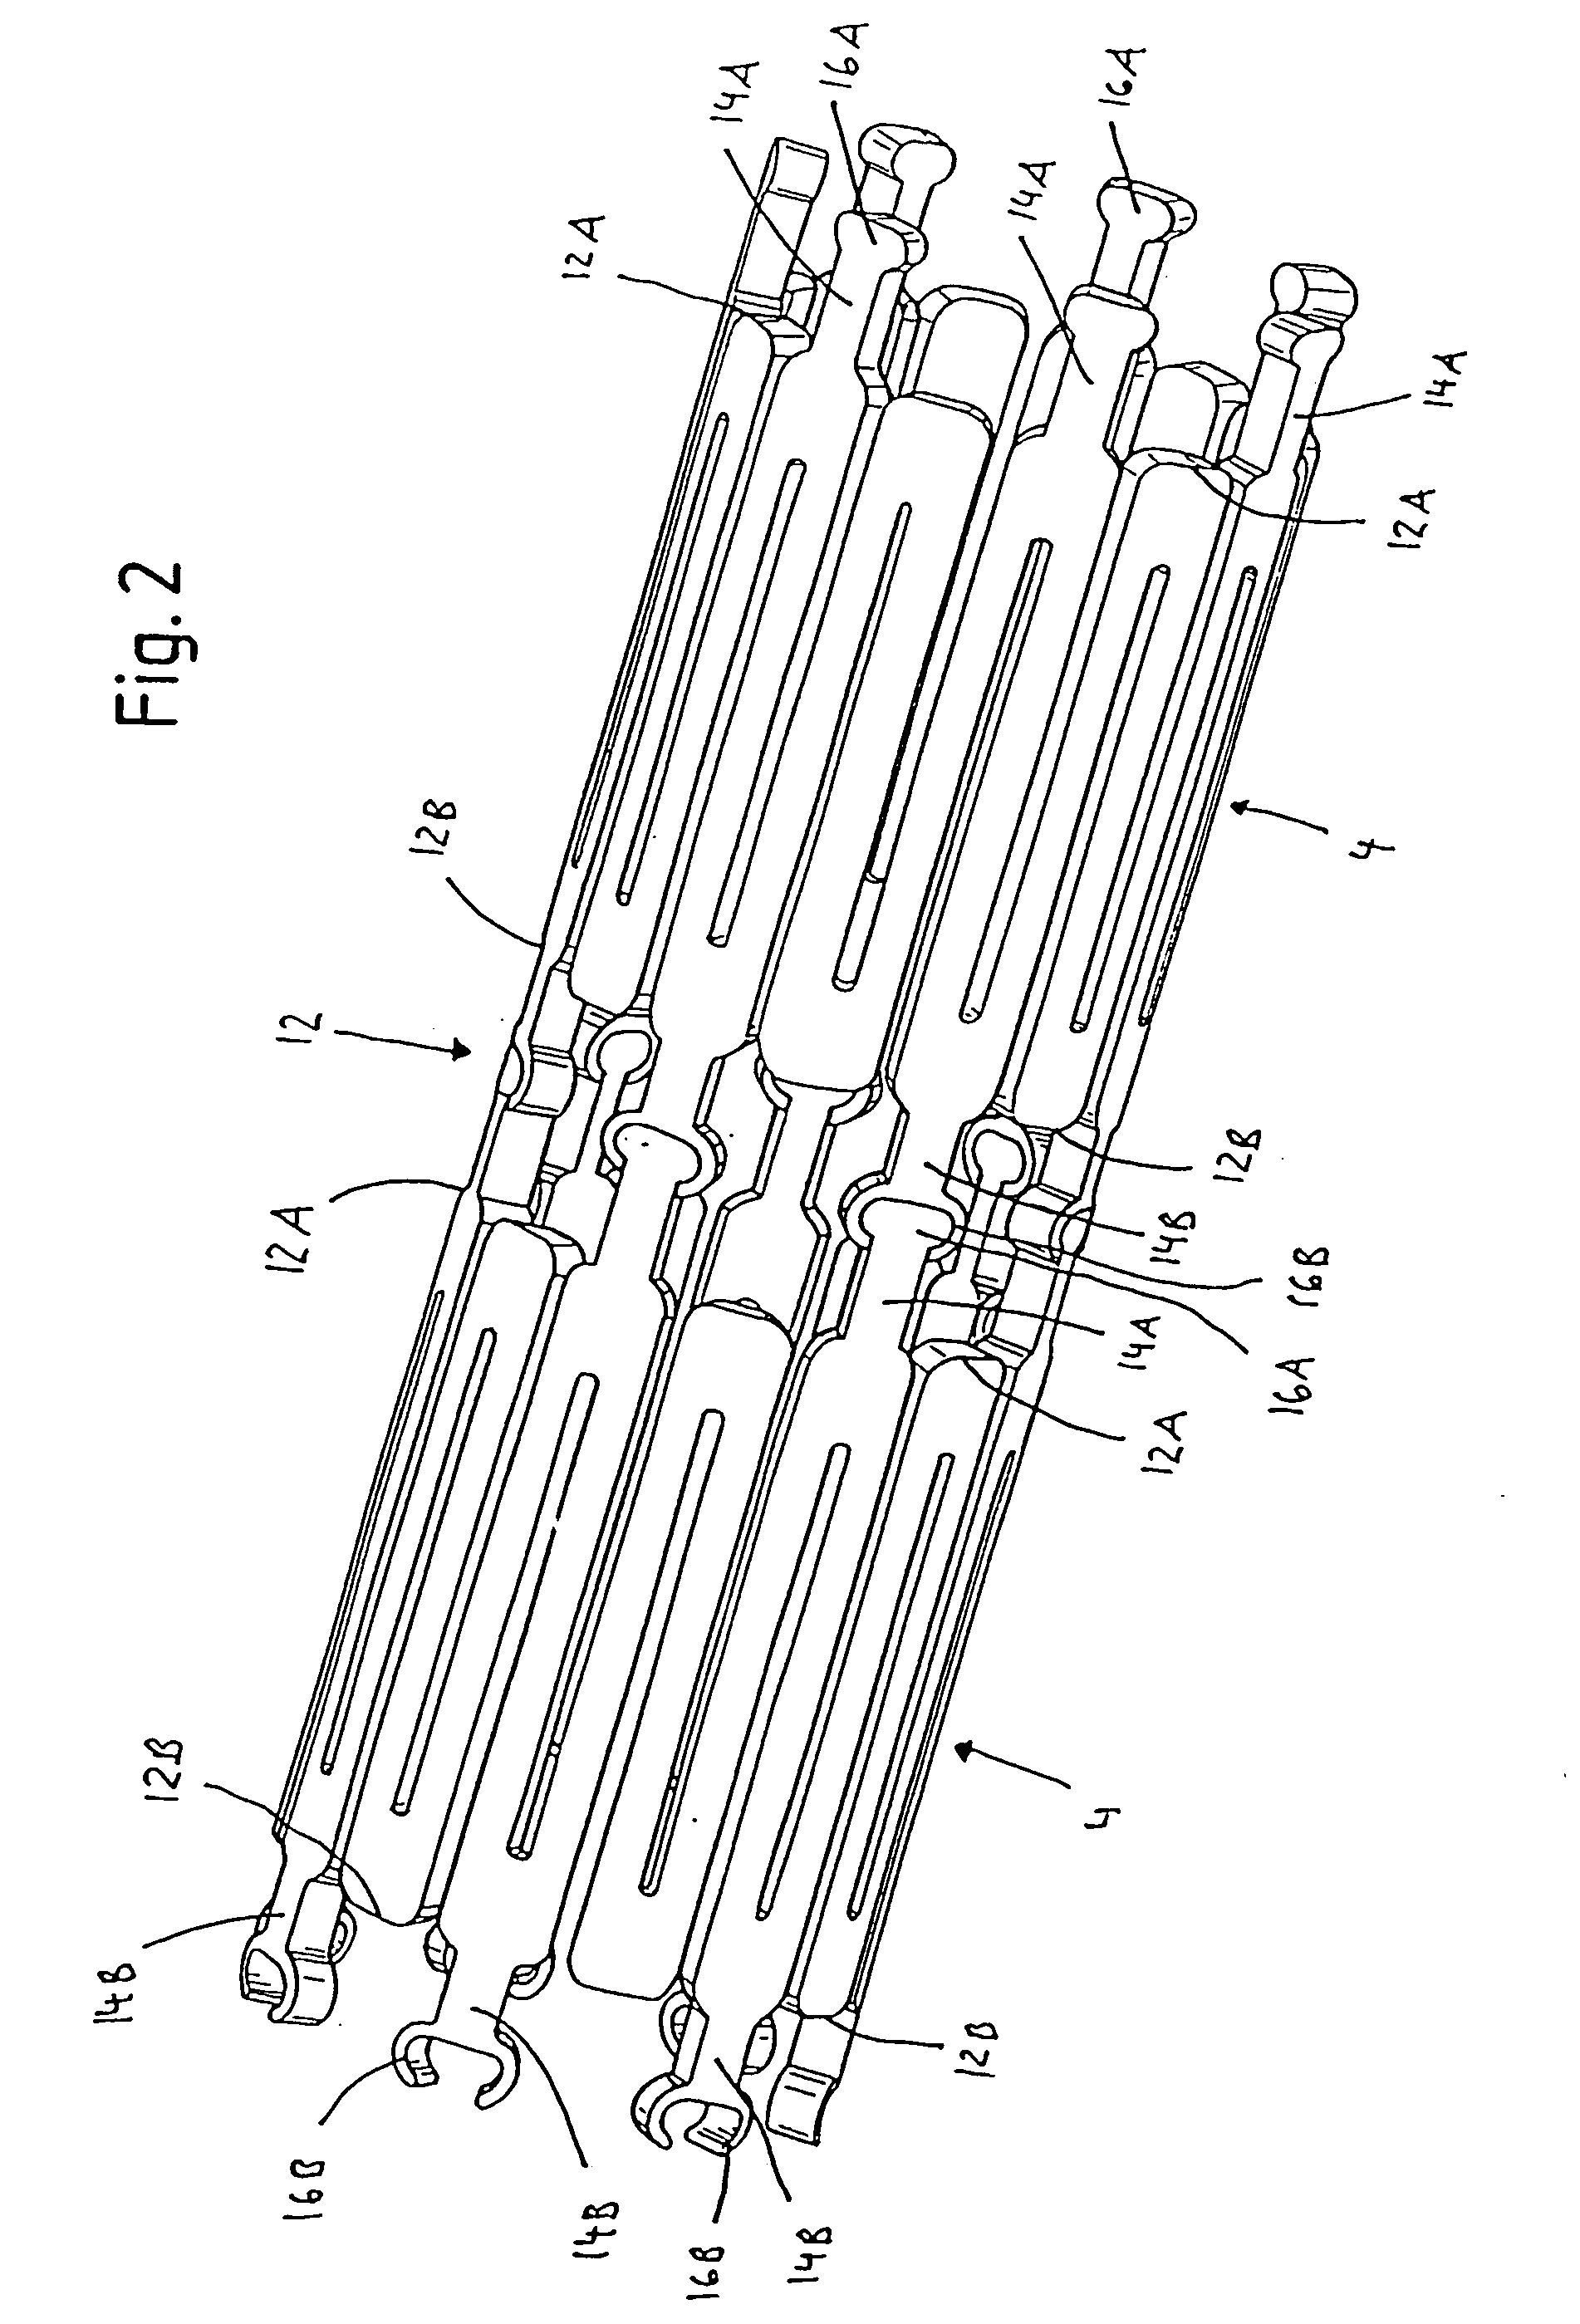 Metal structure compatible with mri imaging, and method of manufacturing such a structure